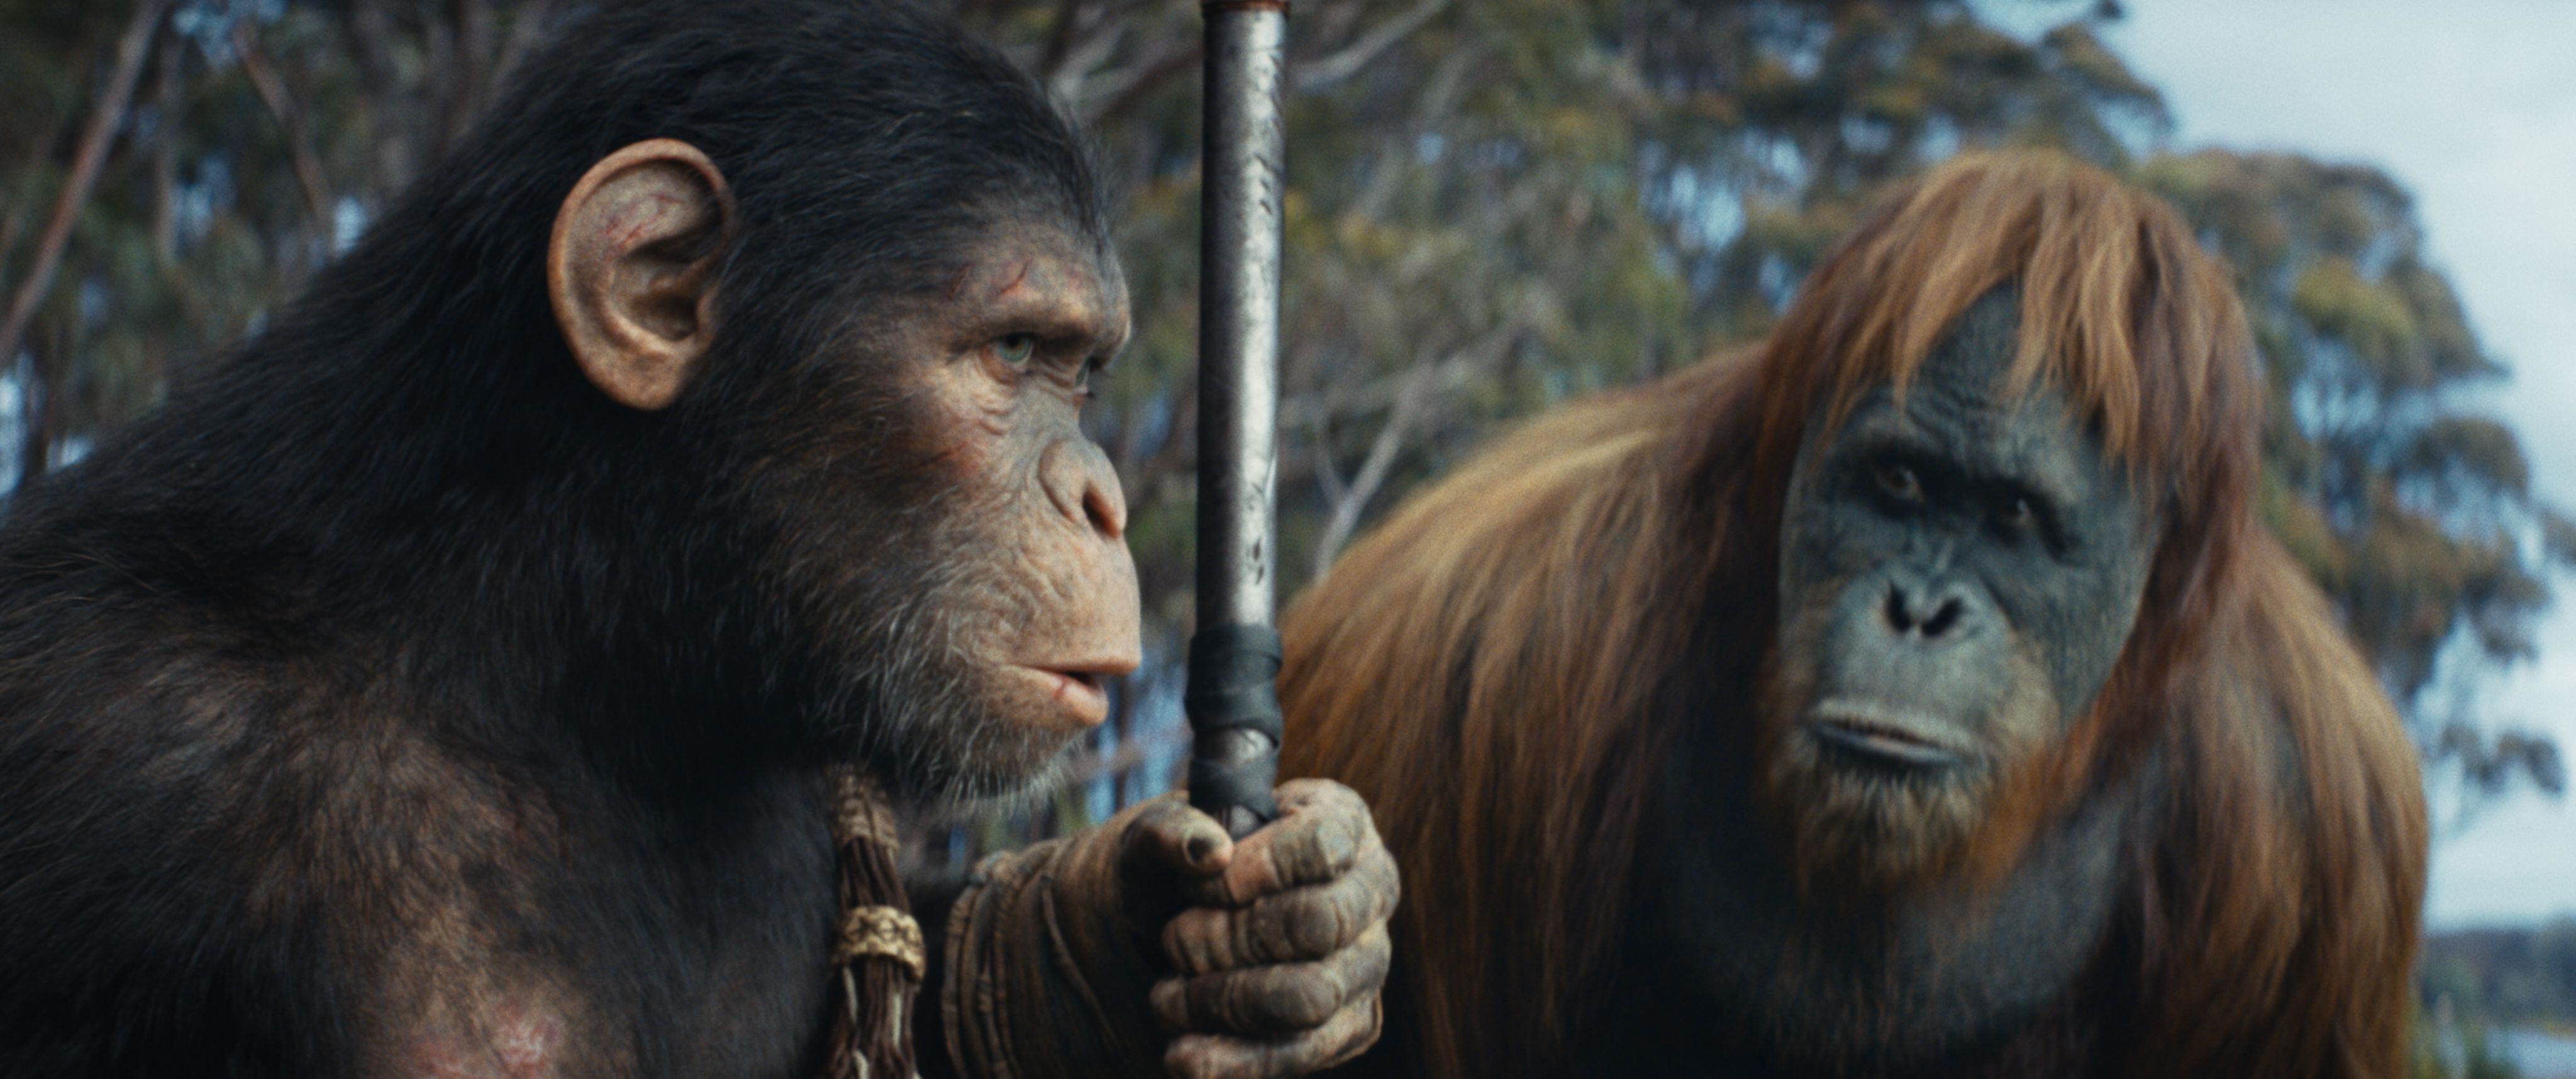 (L-R): Noa (played by Owen Teague) and Raka (played by Peter Macon) in 20th Century Studios' KINGDOM OF THE PLANET OF THE APES. Photo courtesy of 20th Century Studios. © 2024 20th Century Studios. All Rights Reserved.